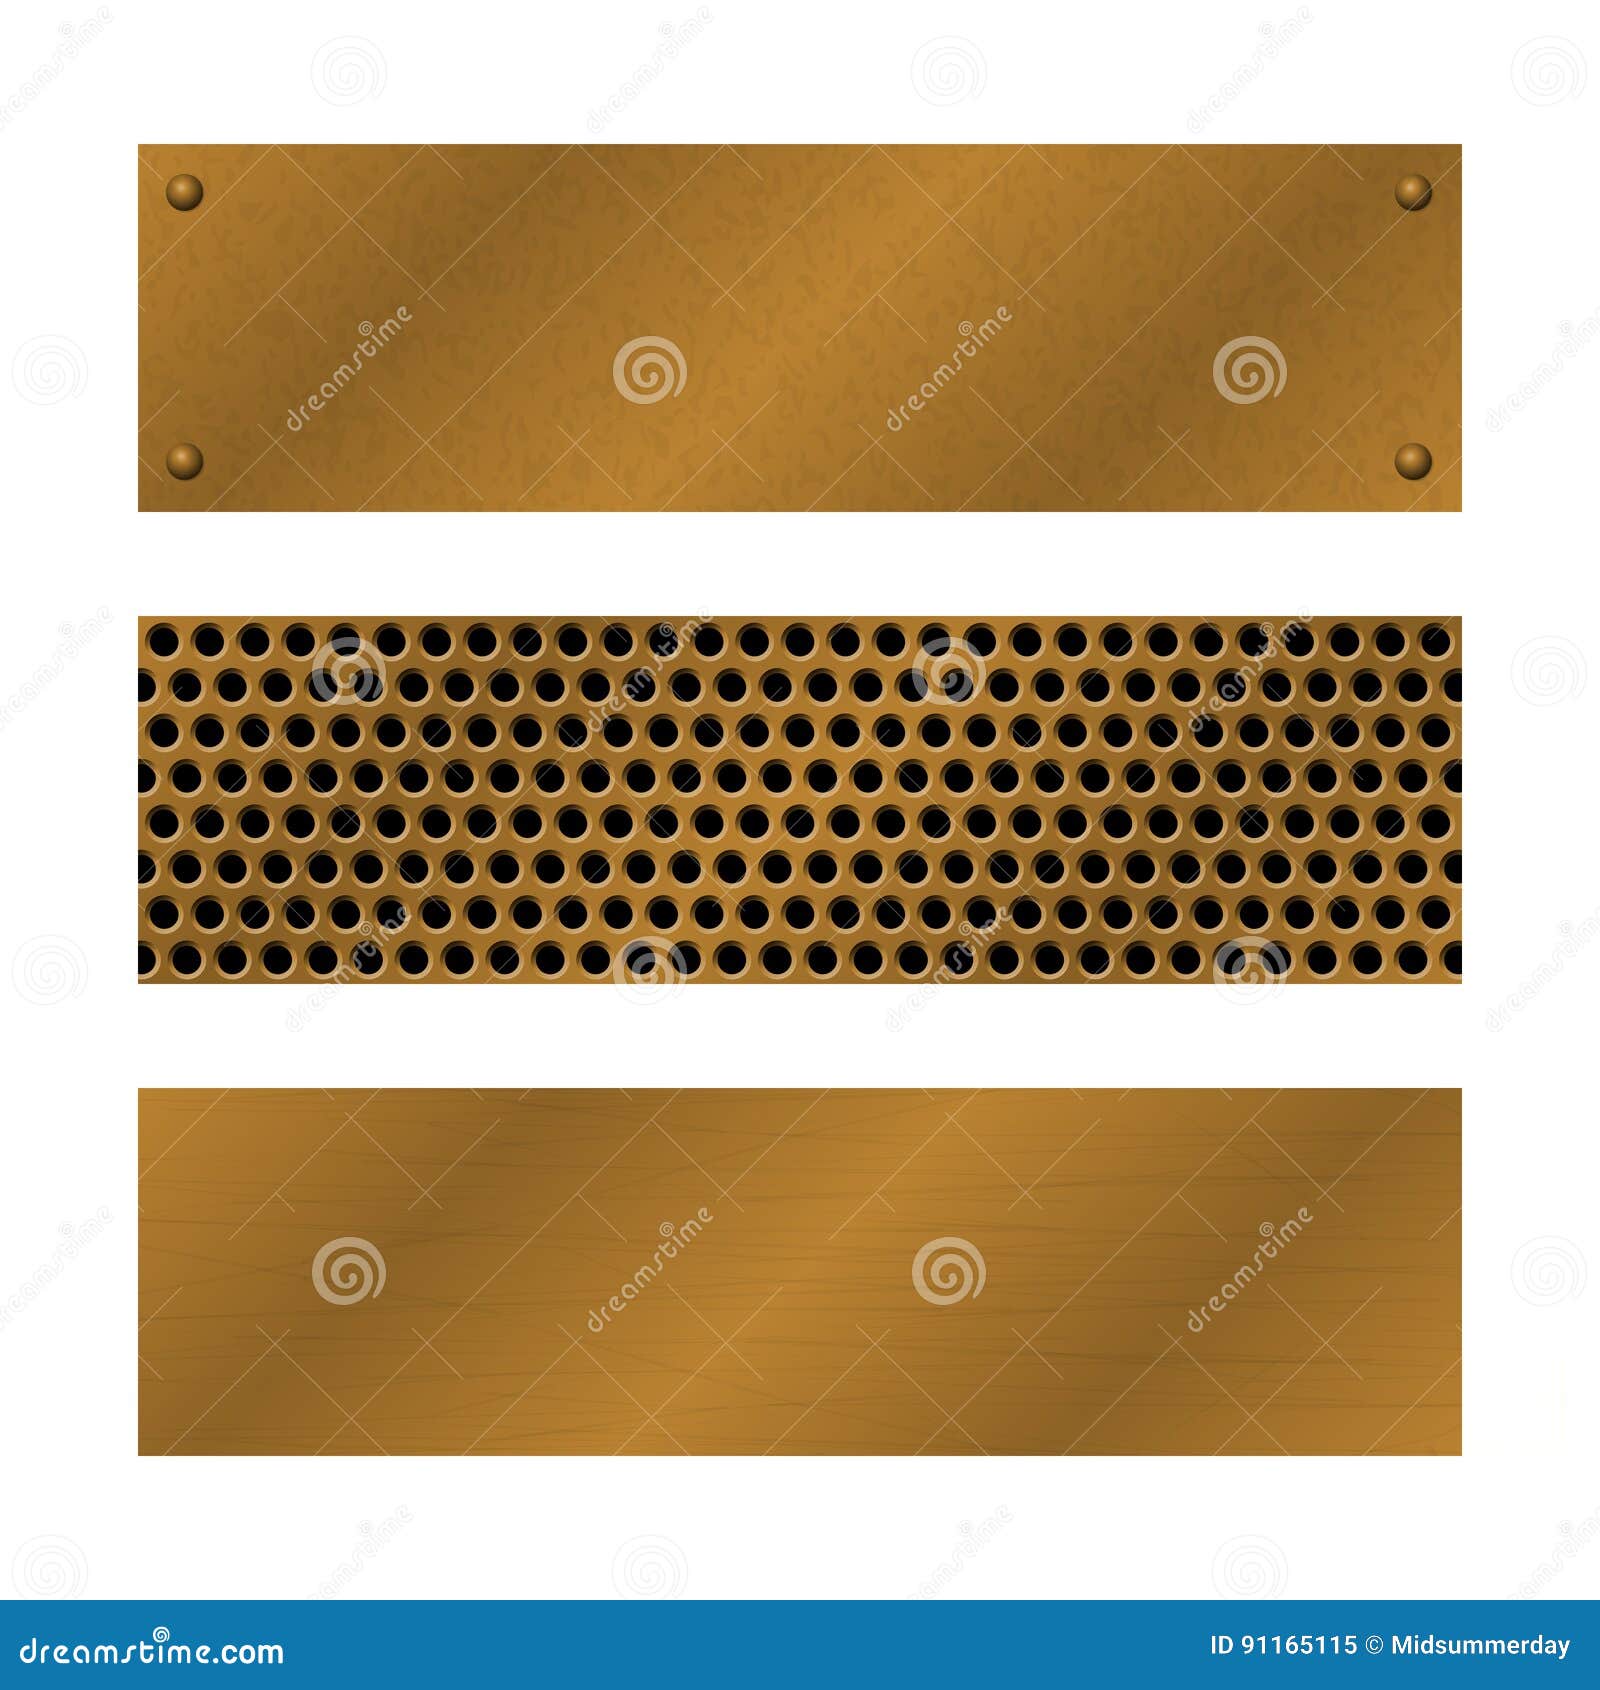 techno  banners. brushed brass, copper latticed surface template. abstract industrial  for web